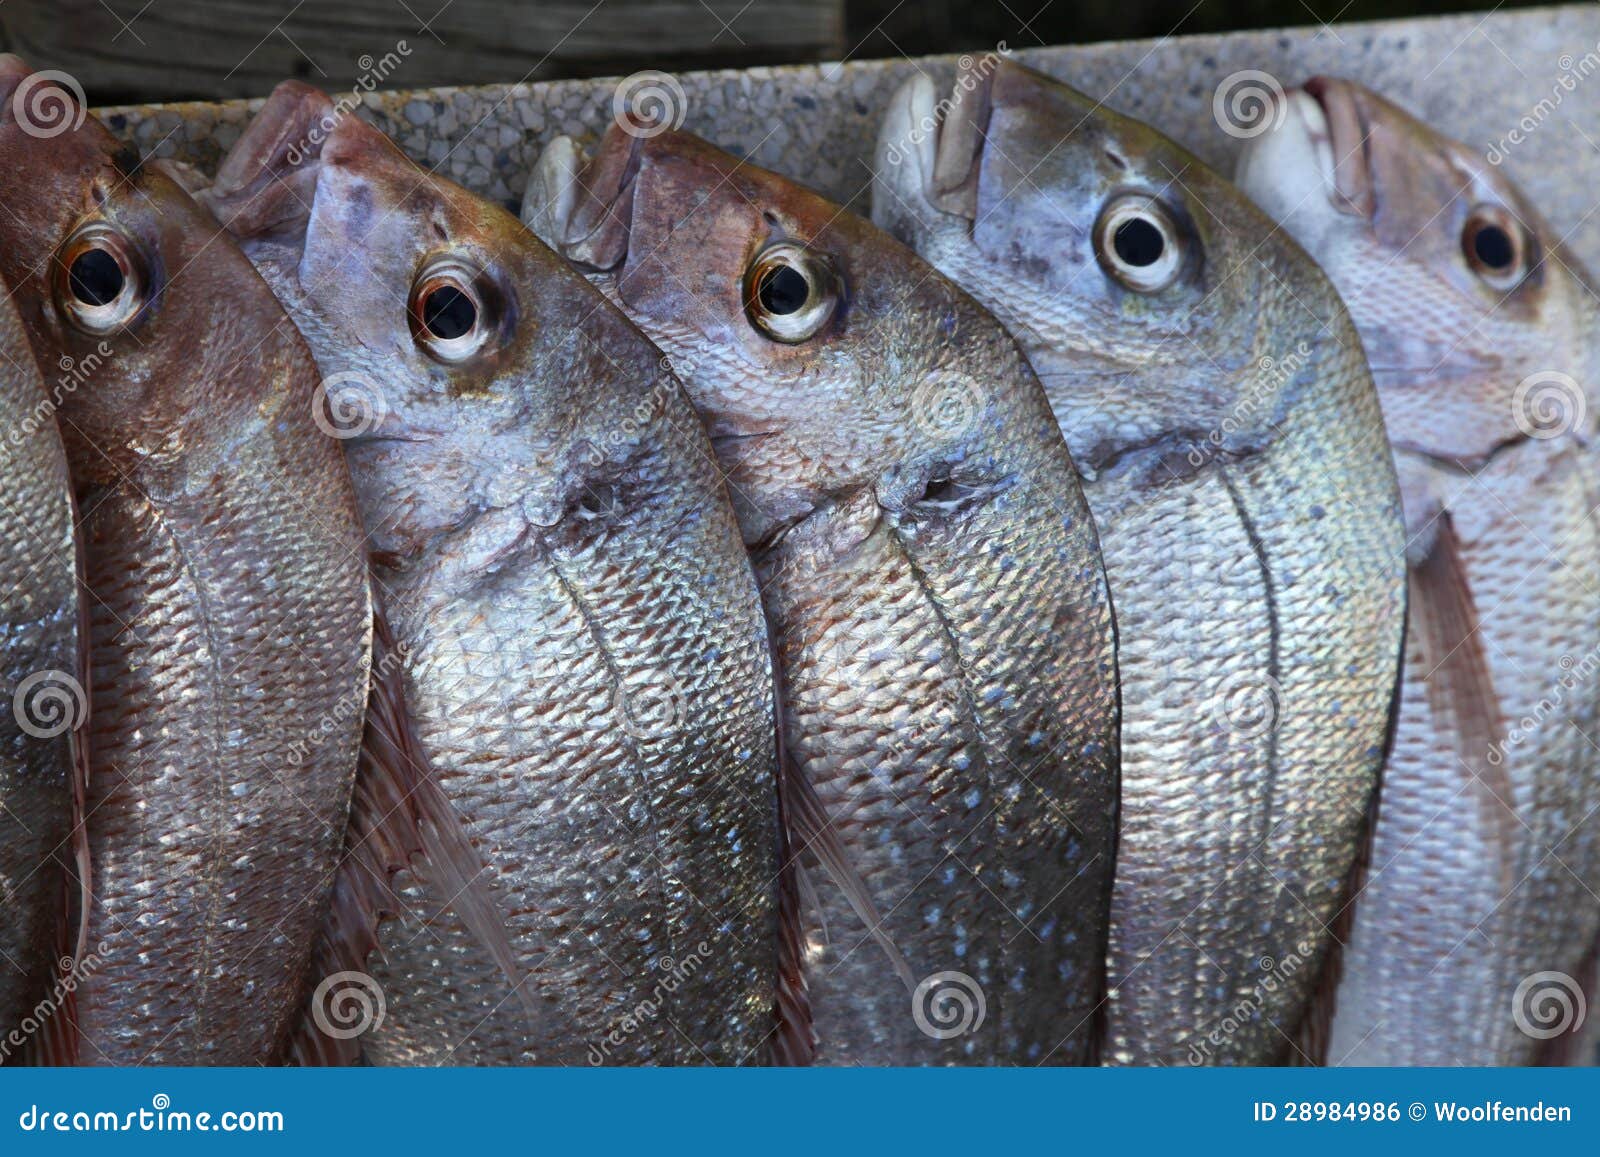 Snapper on a slab stock photo. Image of seafood, fish - 28984986